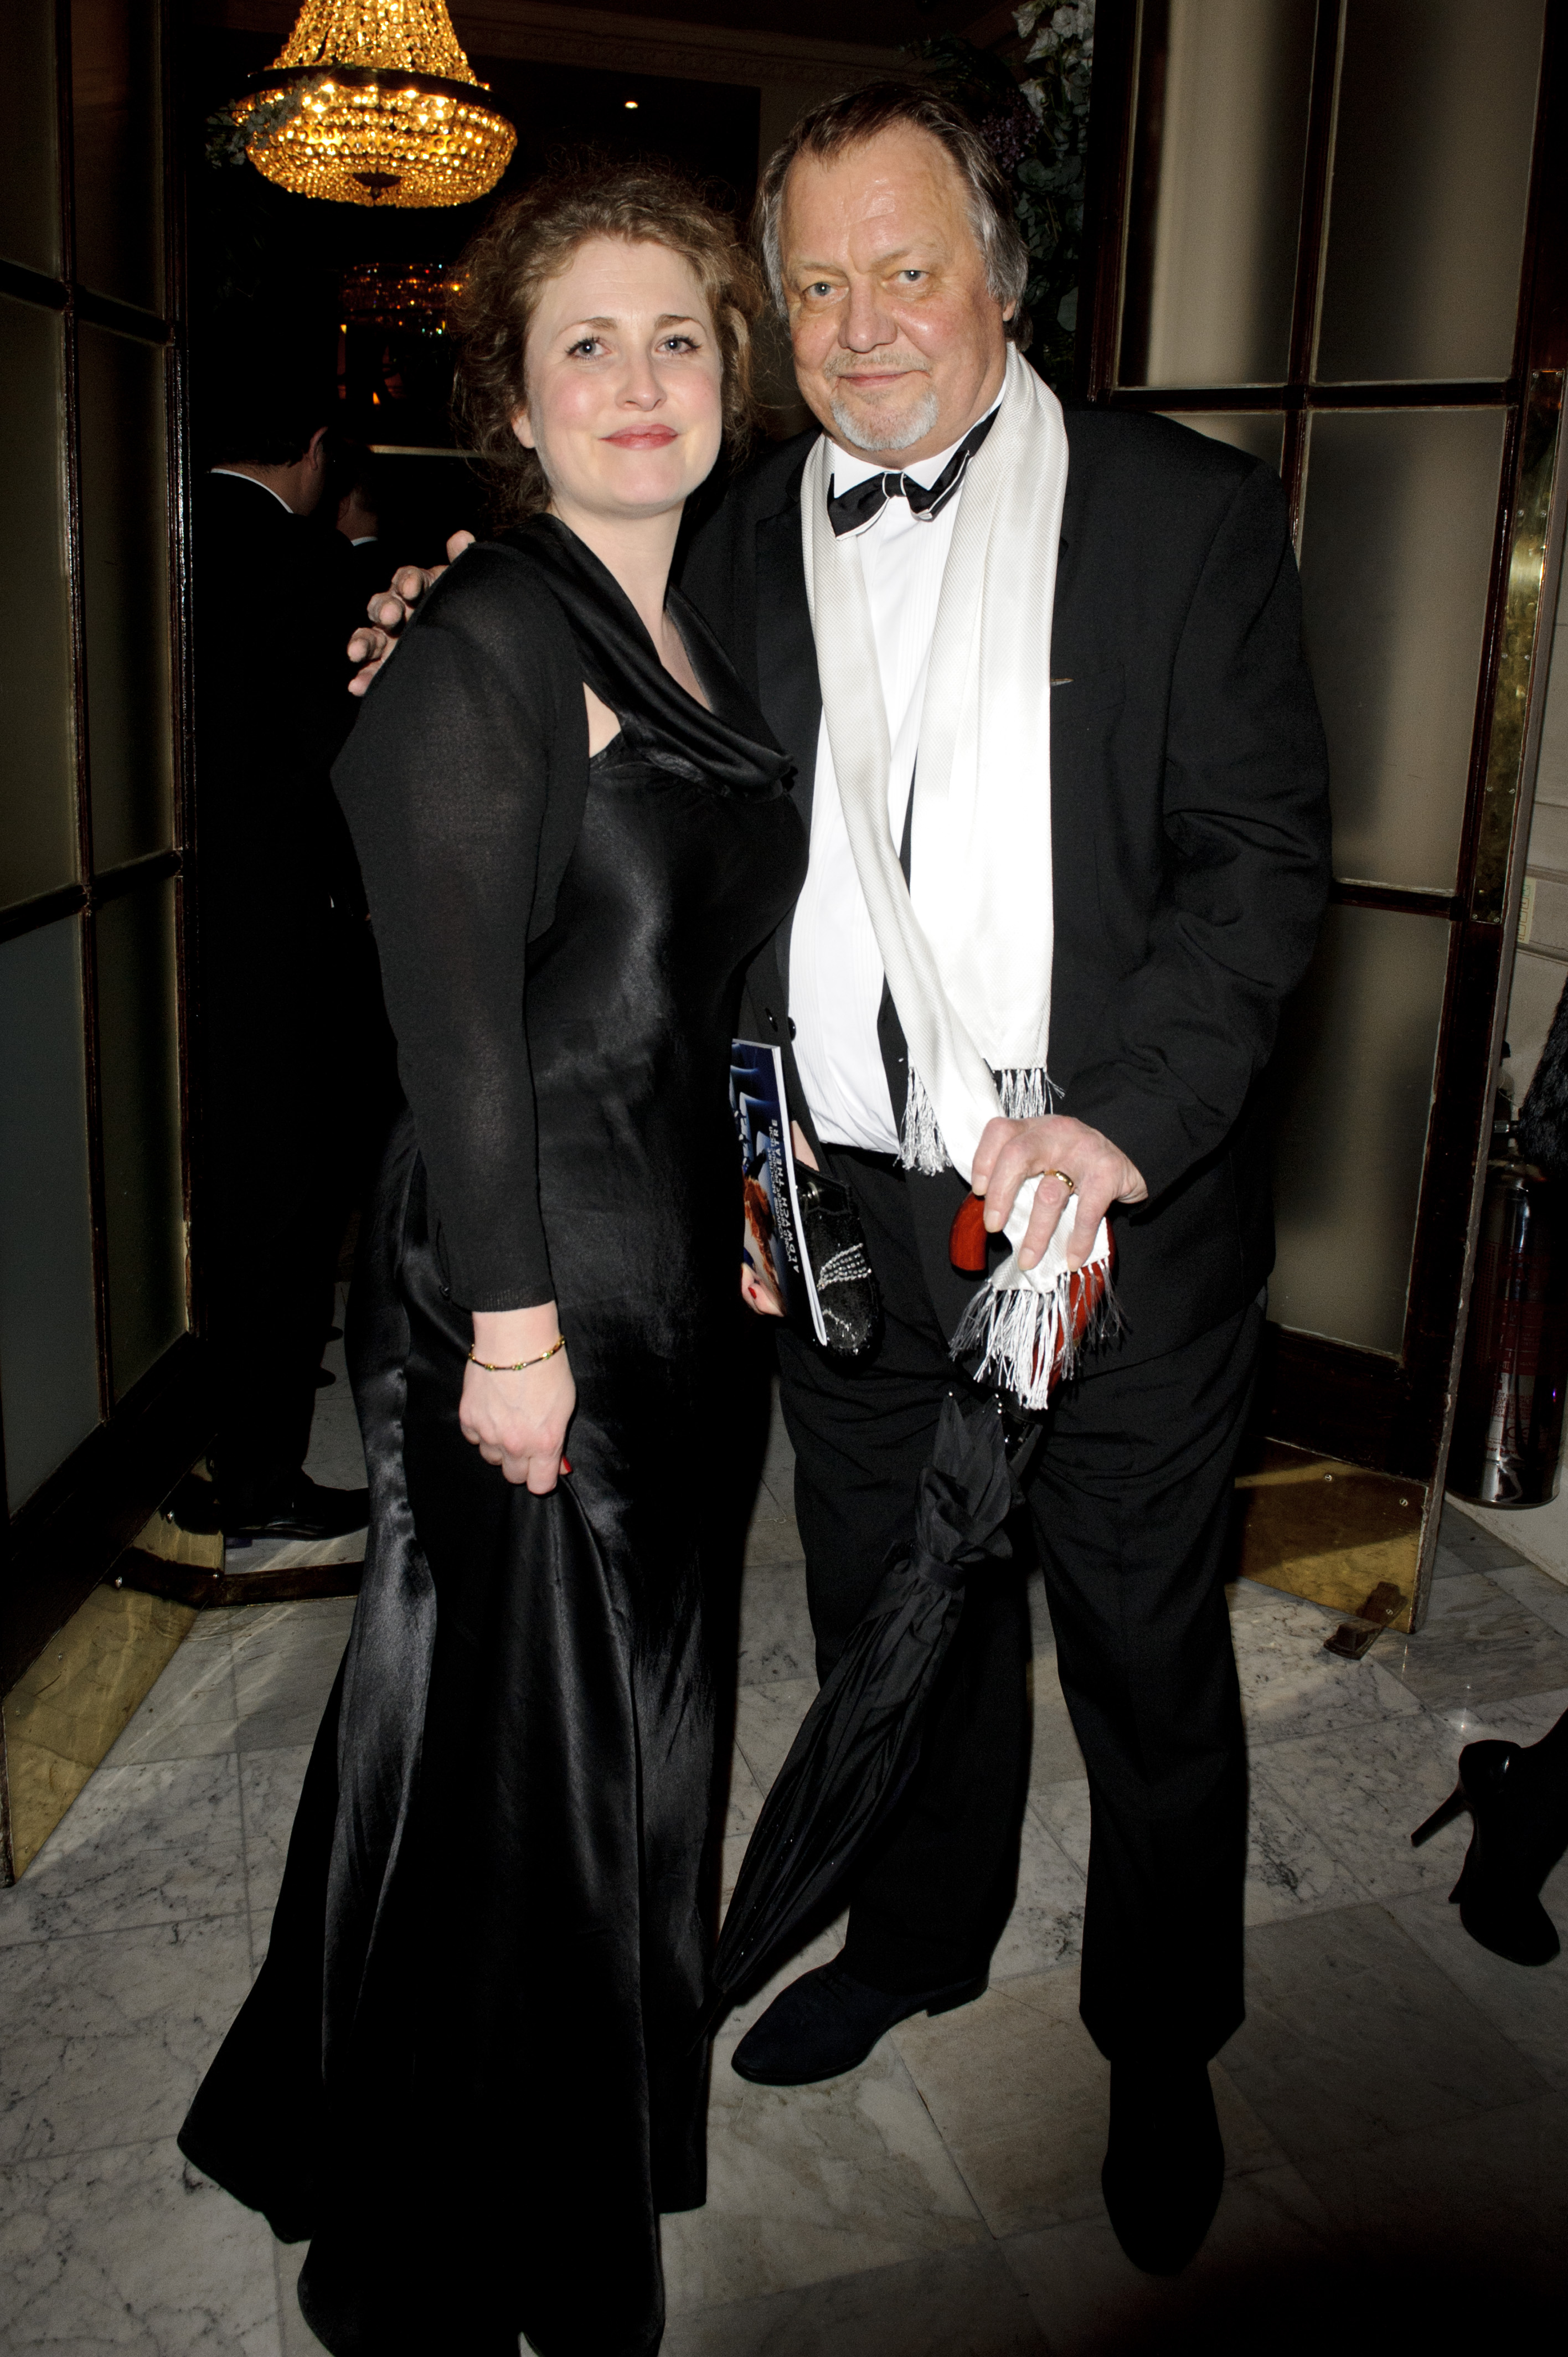 Helen Snell and David Soul at Aldwych Theatre on May 9, 2012 in London, England Source: Getty Images